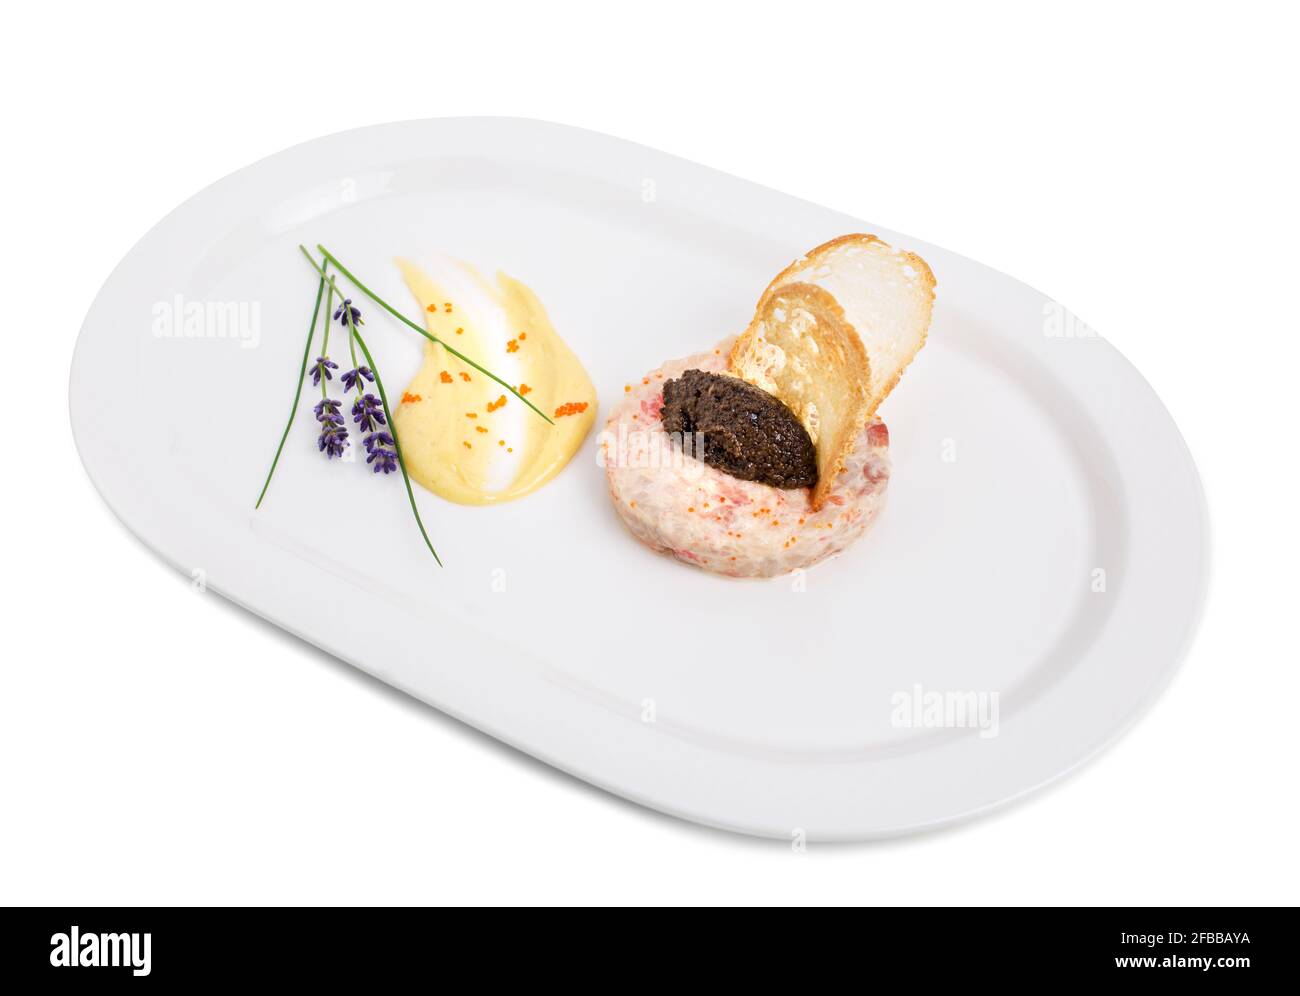 Salmon tartare with black truffle sauce and delicious mousse. Isolated on a white background. Stock Photo